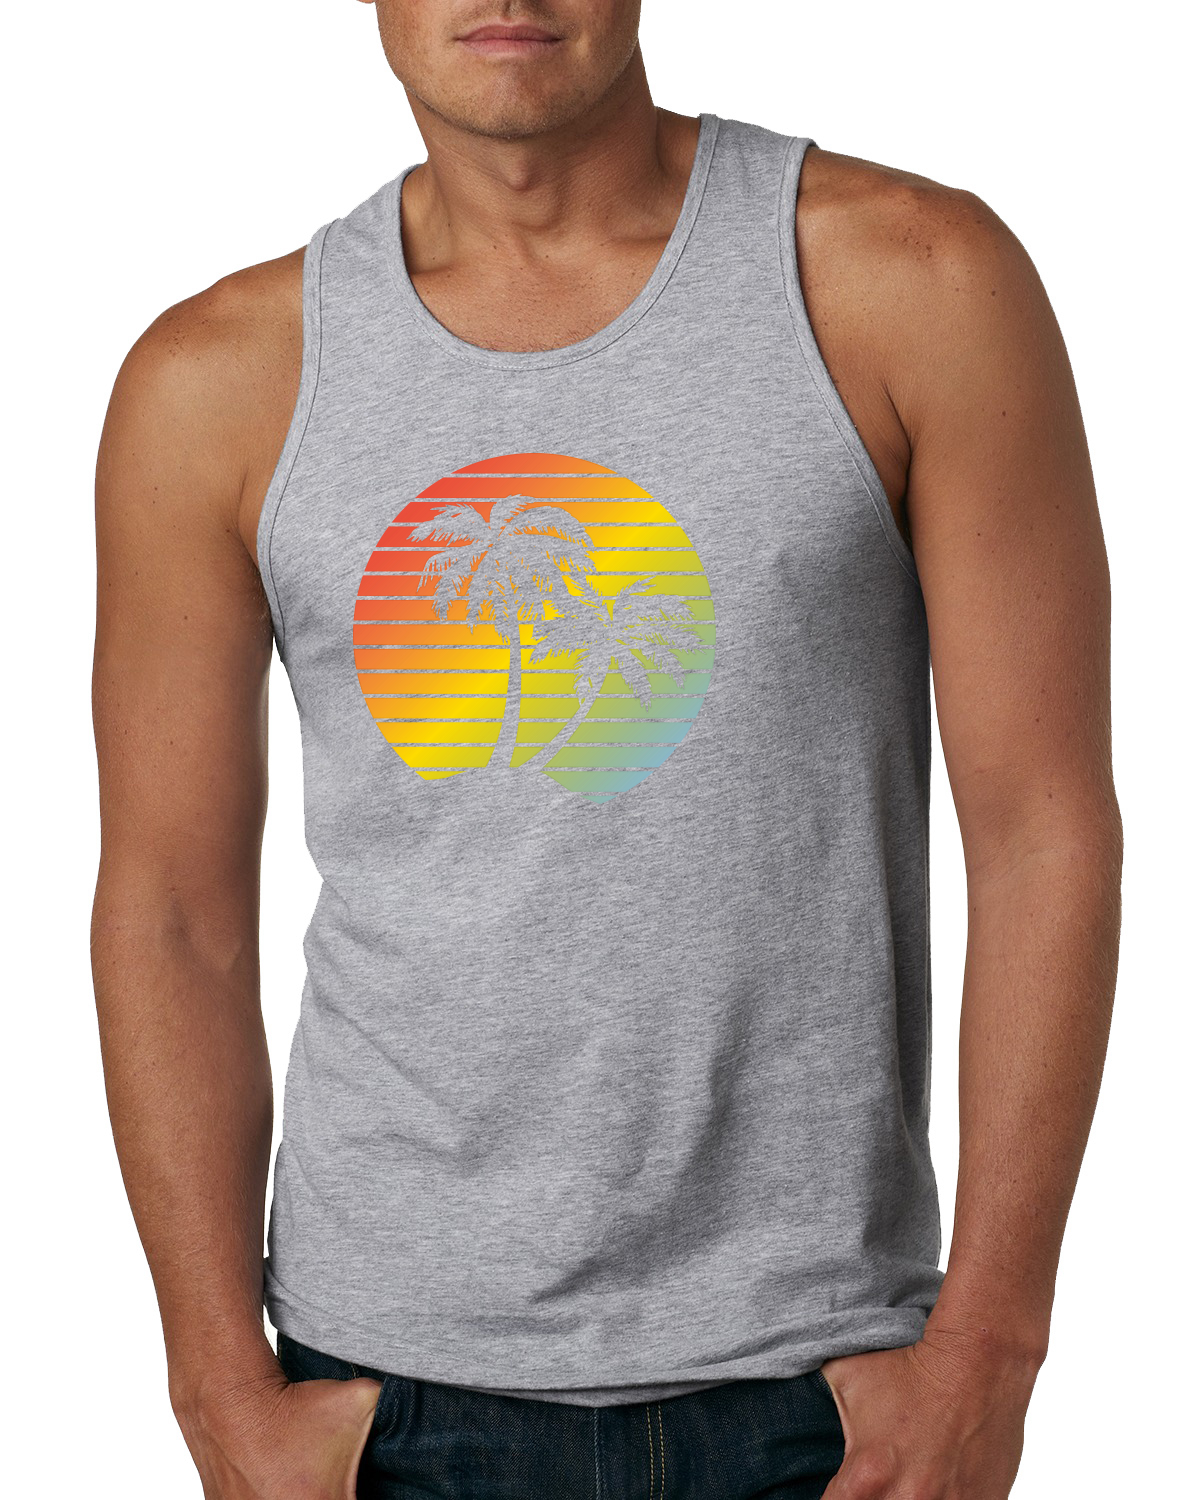 Two Coconut Palm Trees Beach Sunset | Mens Pop Culture Graphic Tank Top, Heather Grey, Small - image 1 of 4